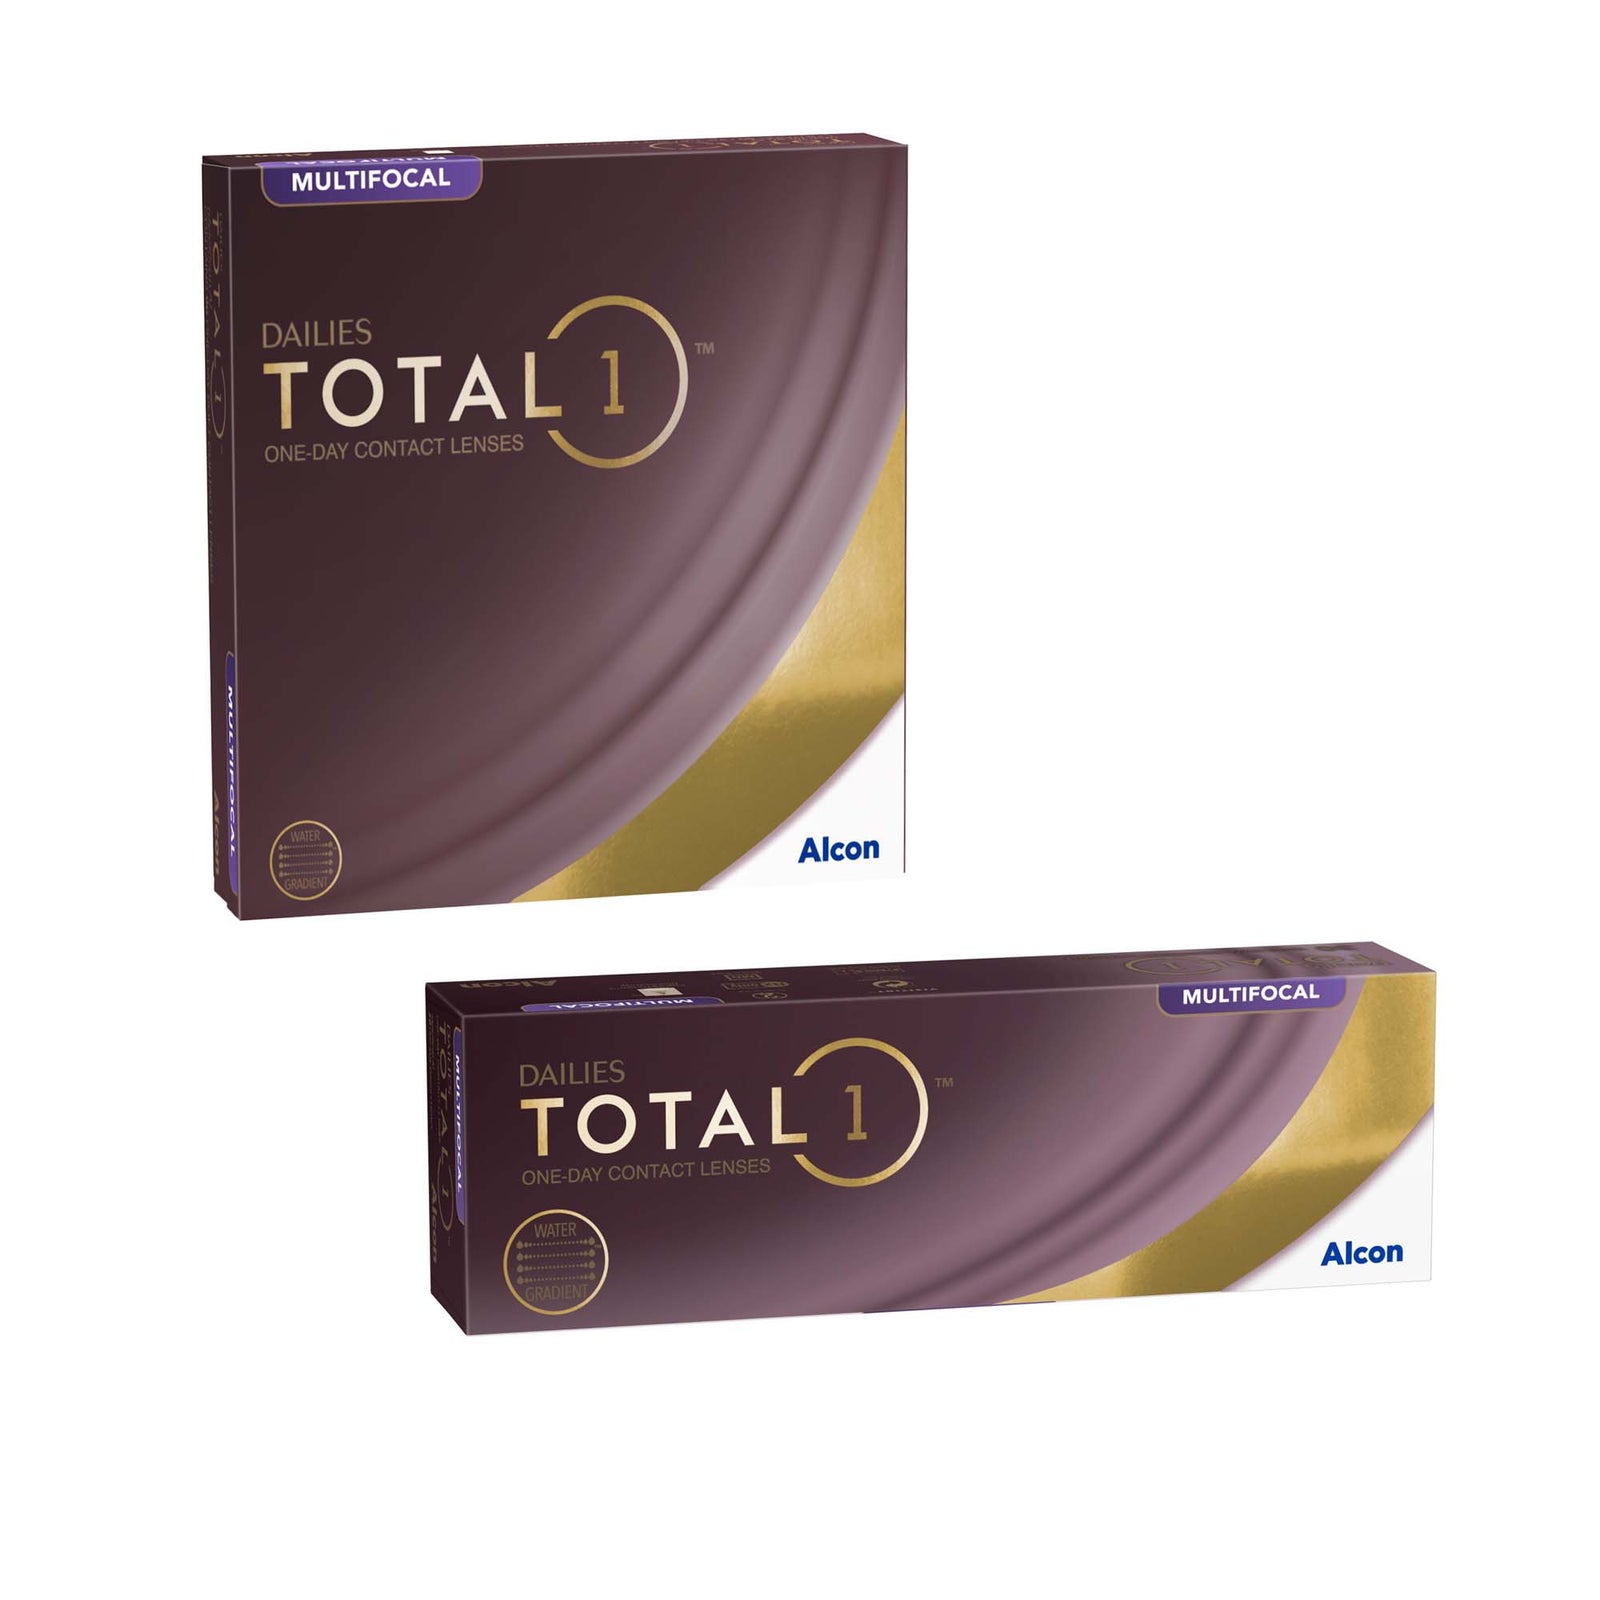 DAILIES : TOTAL1™ Multifocal Contact Lenses – 4 Month Supply